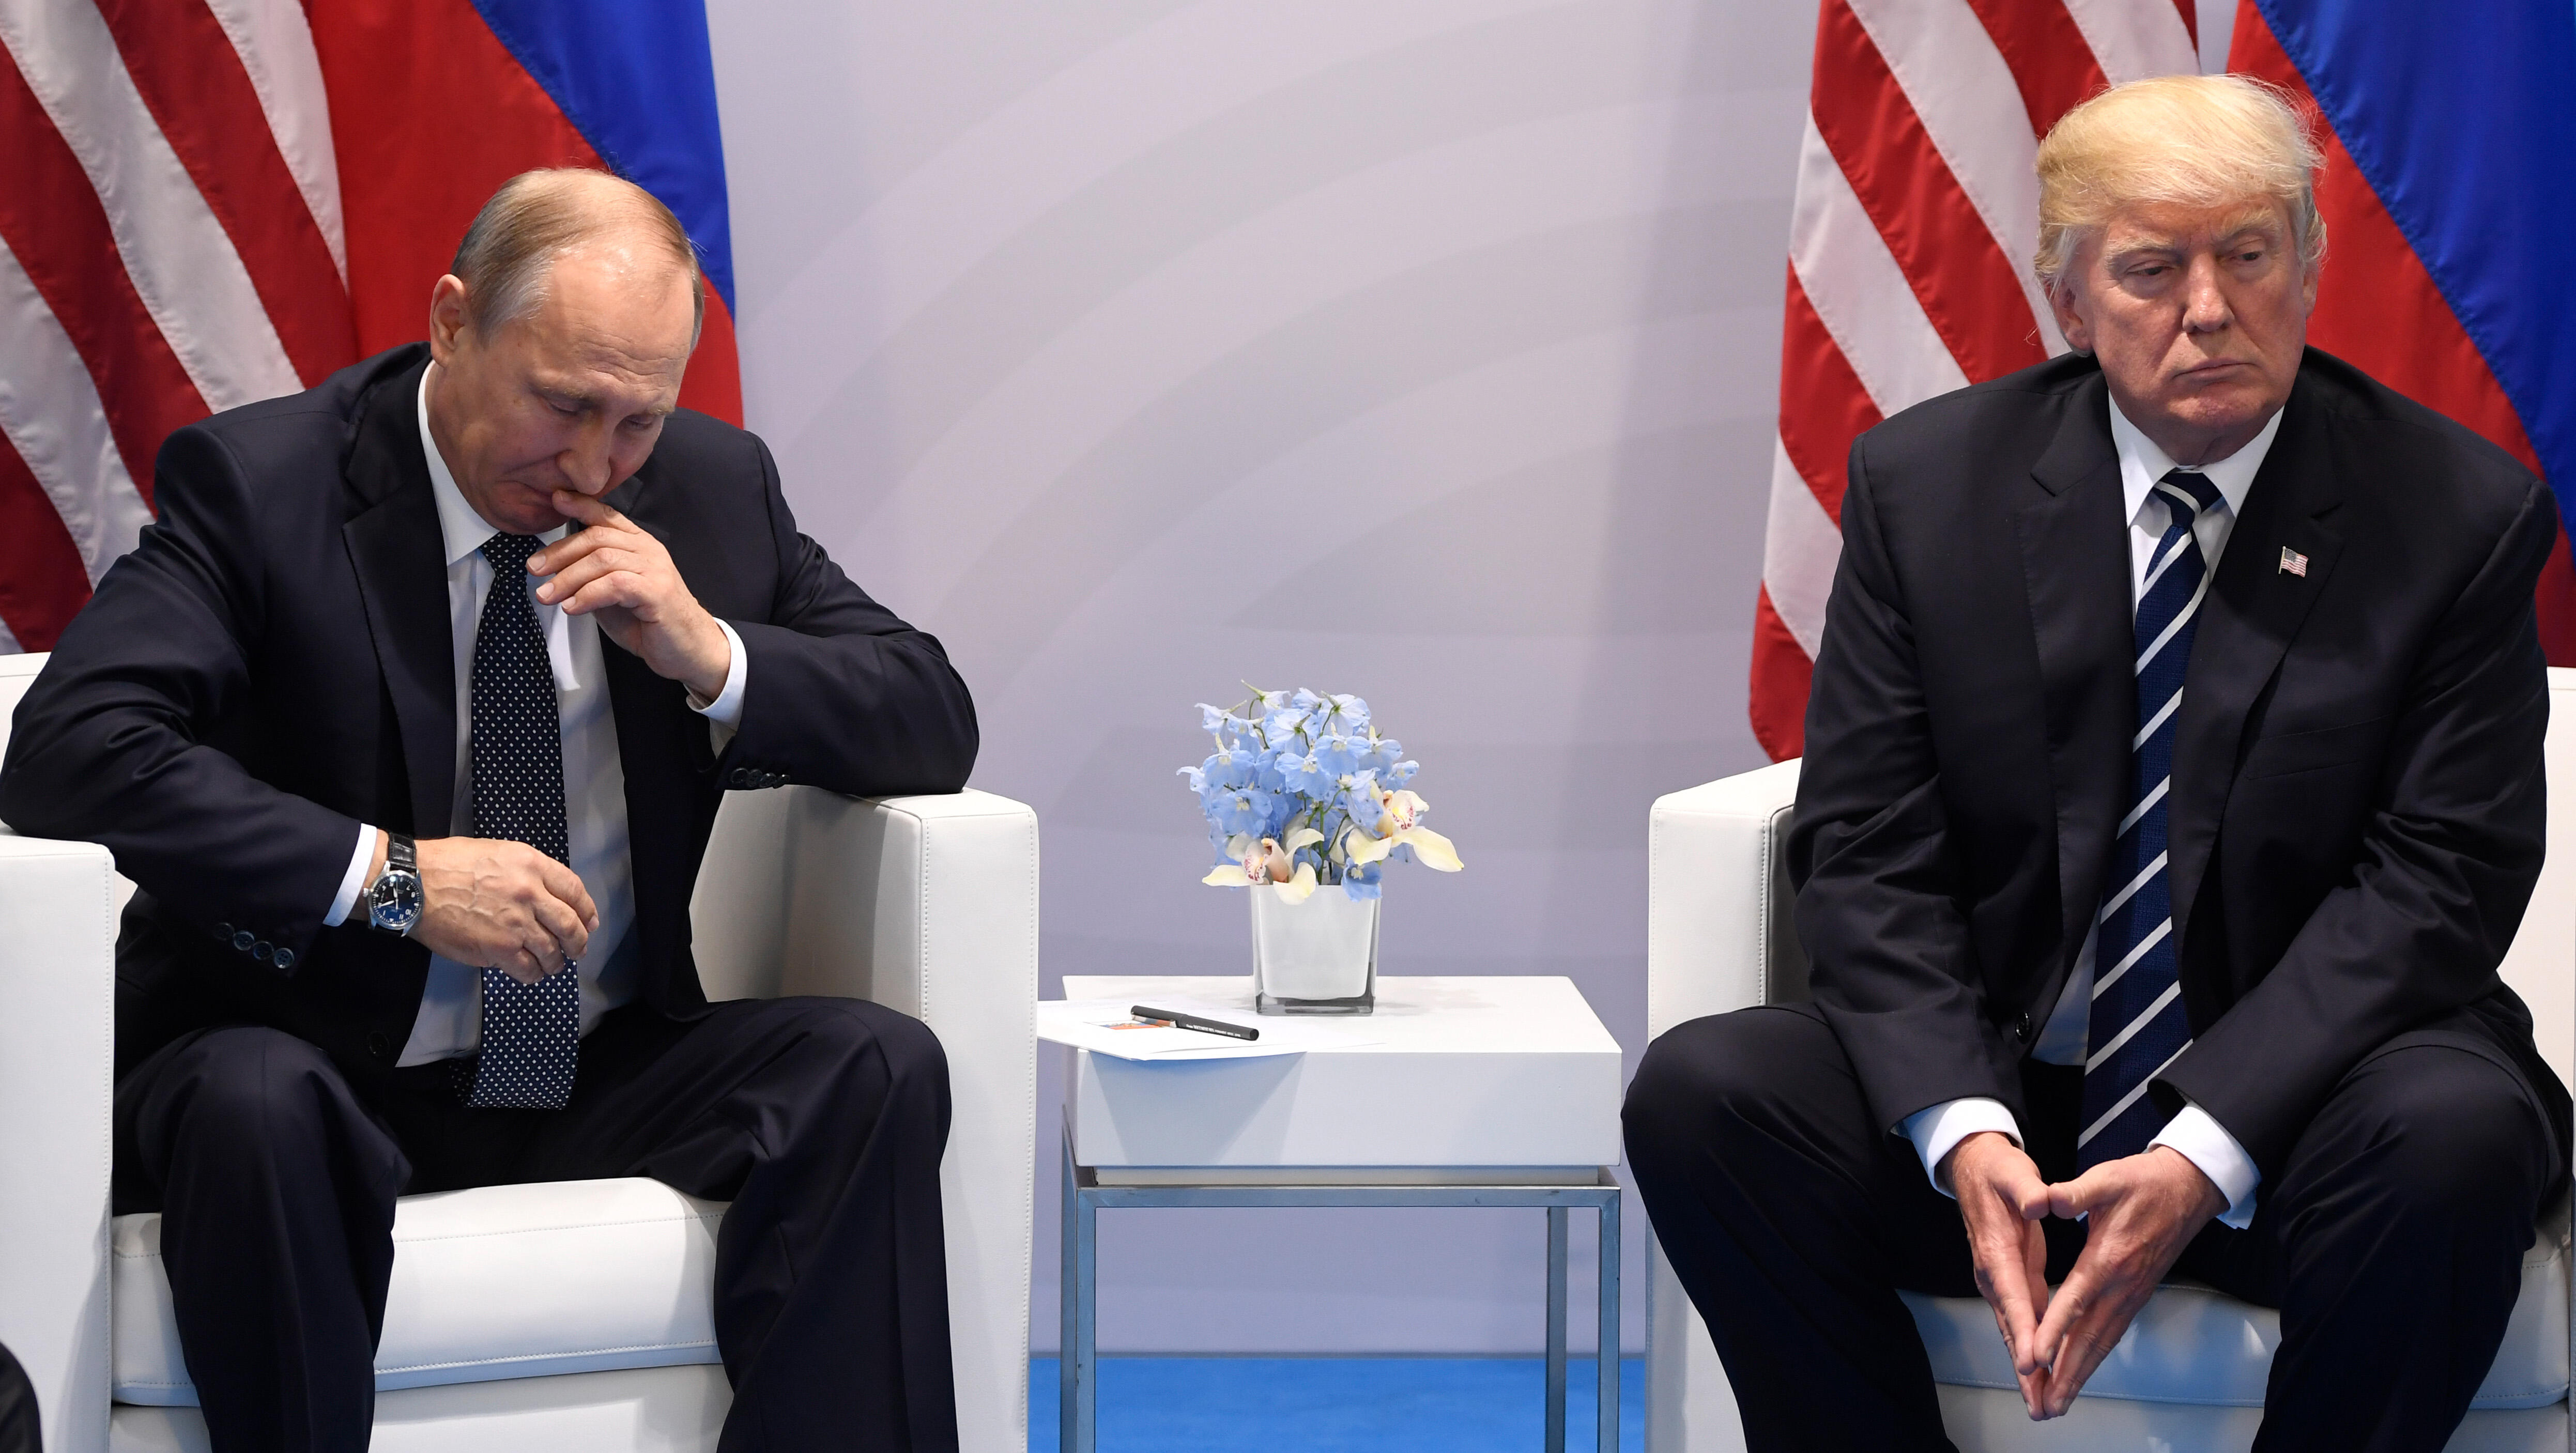 US President Donald Trump and Russia's President Vladimir Putin shake hands during a meeting on the sidelines of the G20 Summit in Hamburg, Germany, on July 7, 2017. / AFP PHOTO / SAUL LOEB        (Photo credit should read SAUL LOEB/AFP/Getty Images)